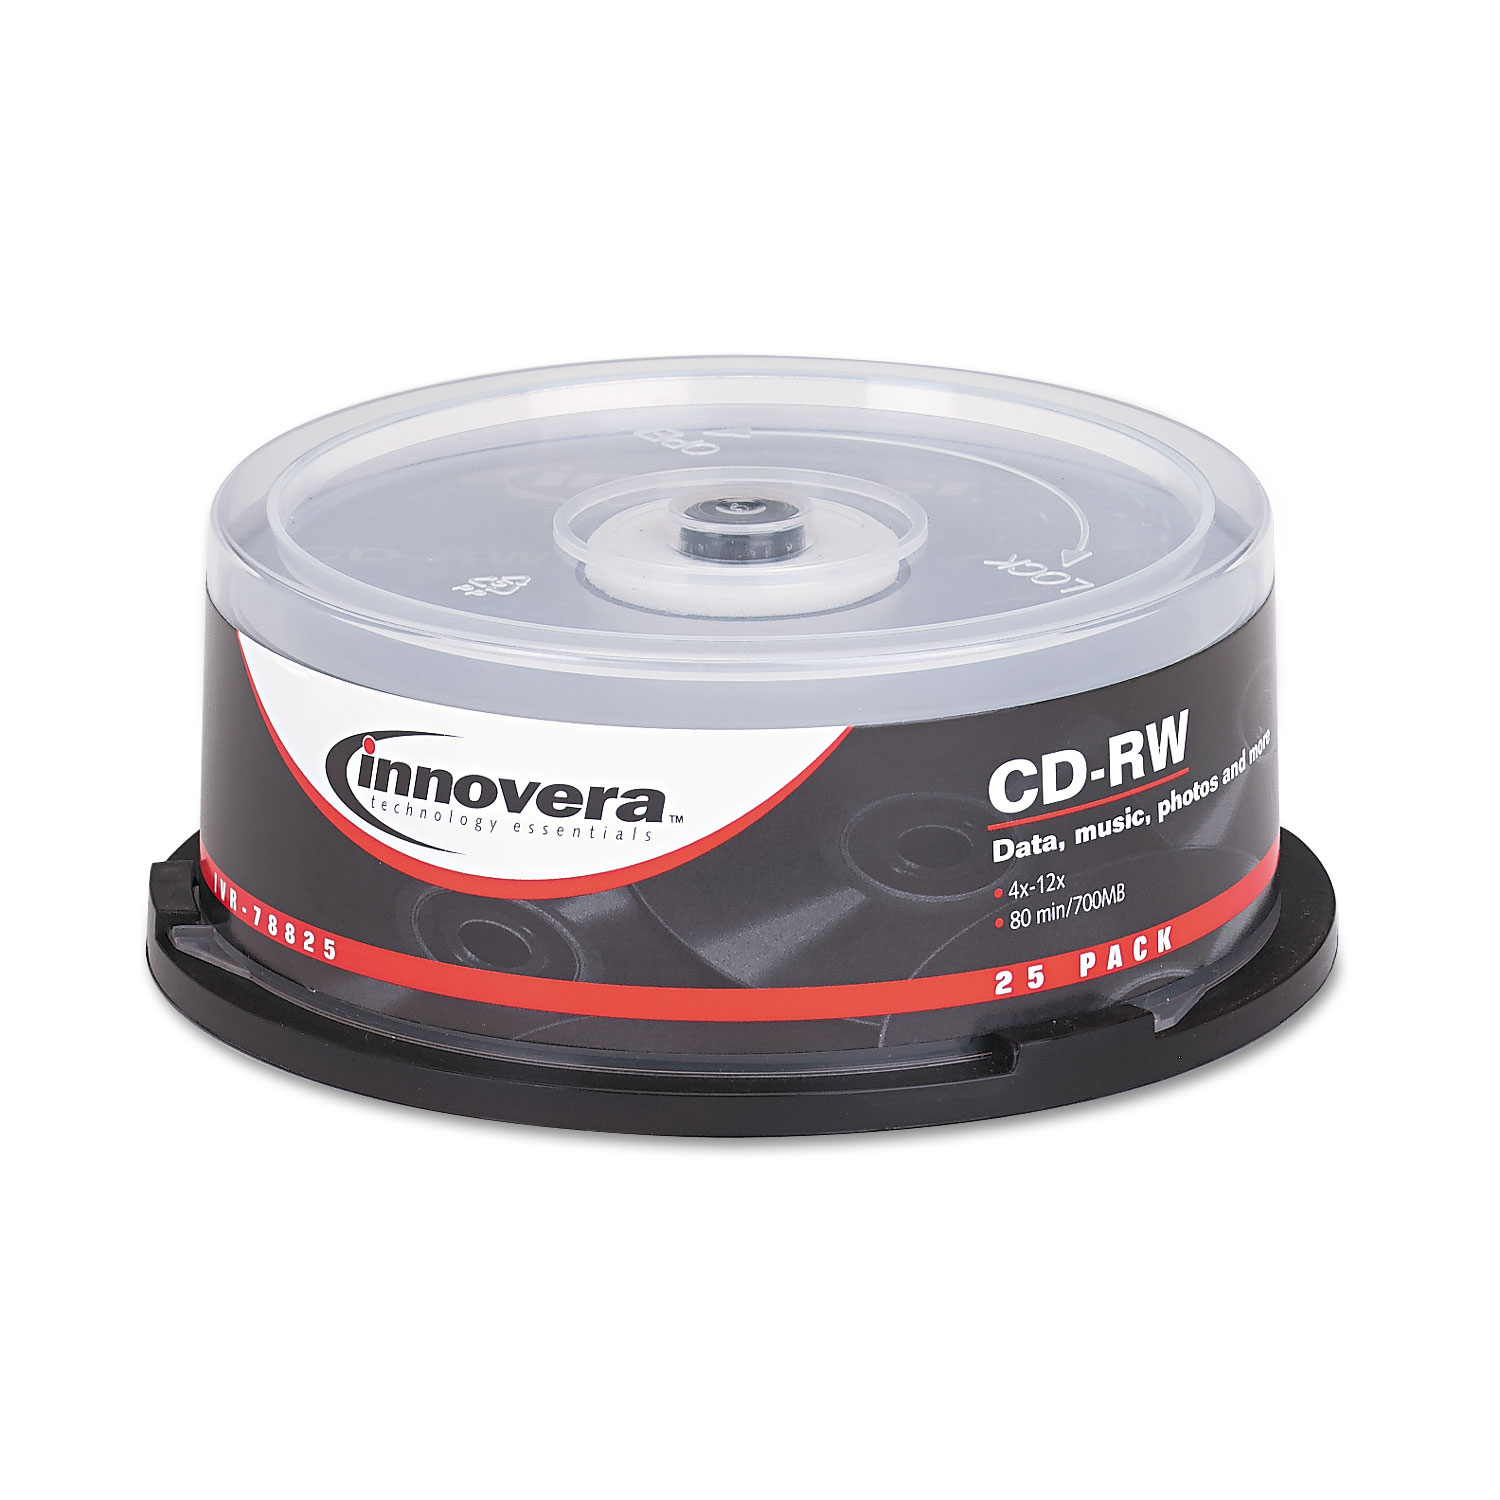 Innovera CD-RW Discs, Rewritable, 700MB/80min, 12x, Spindle, Silver, 50/Pack (78850) - image 3 of 3